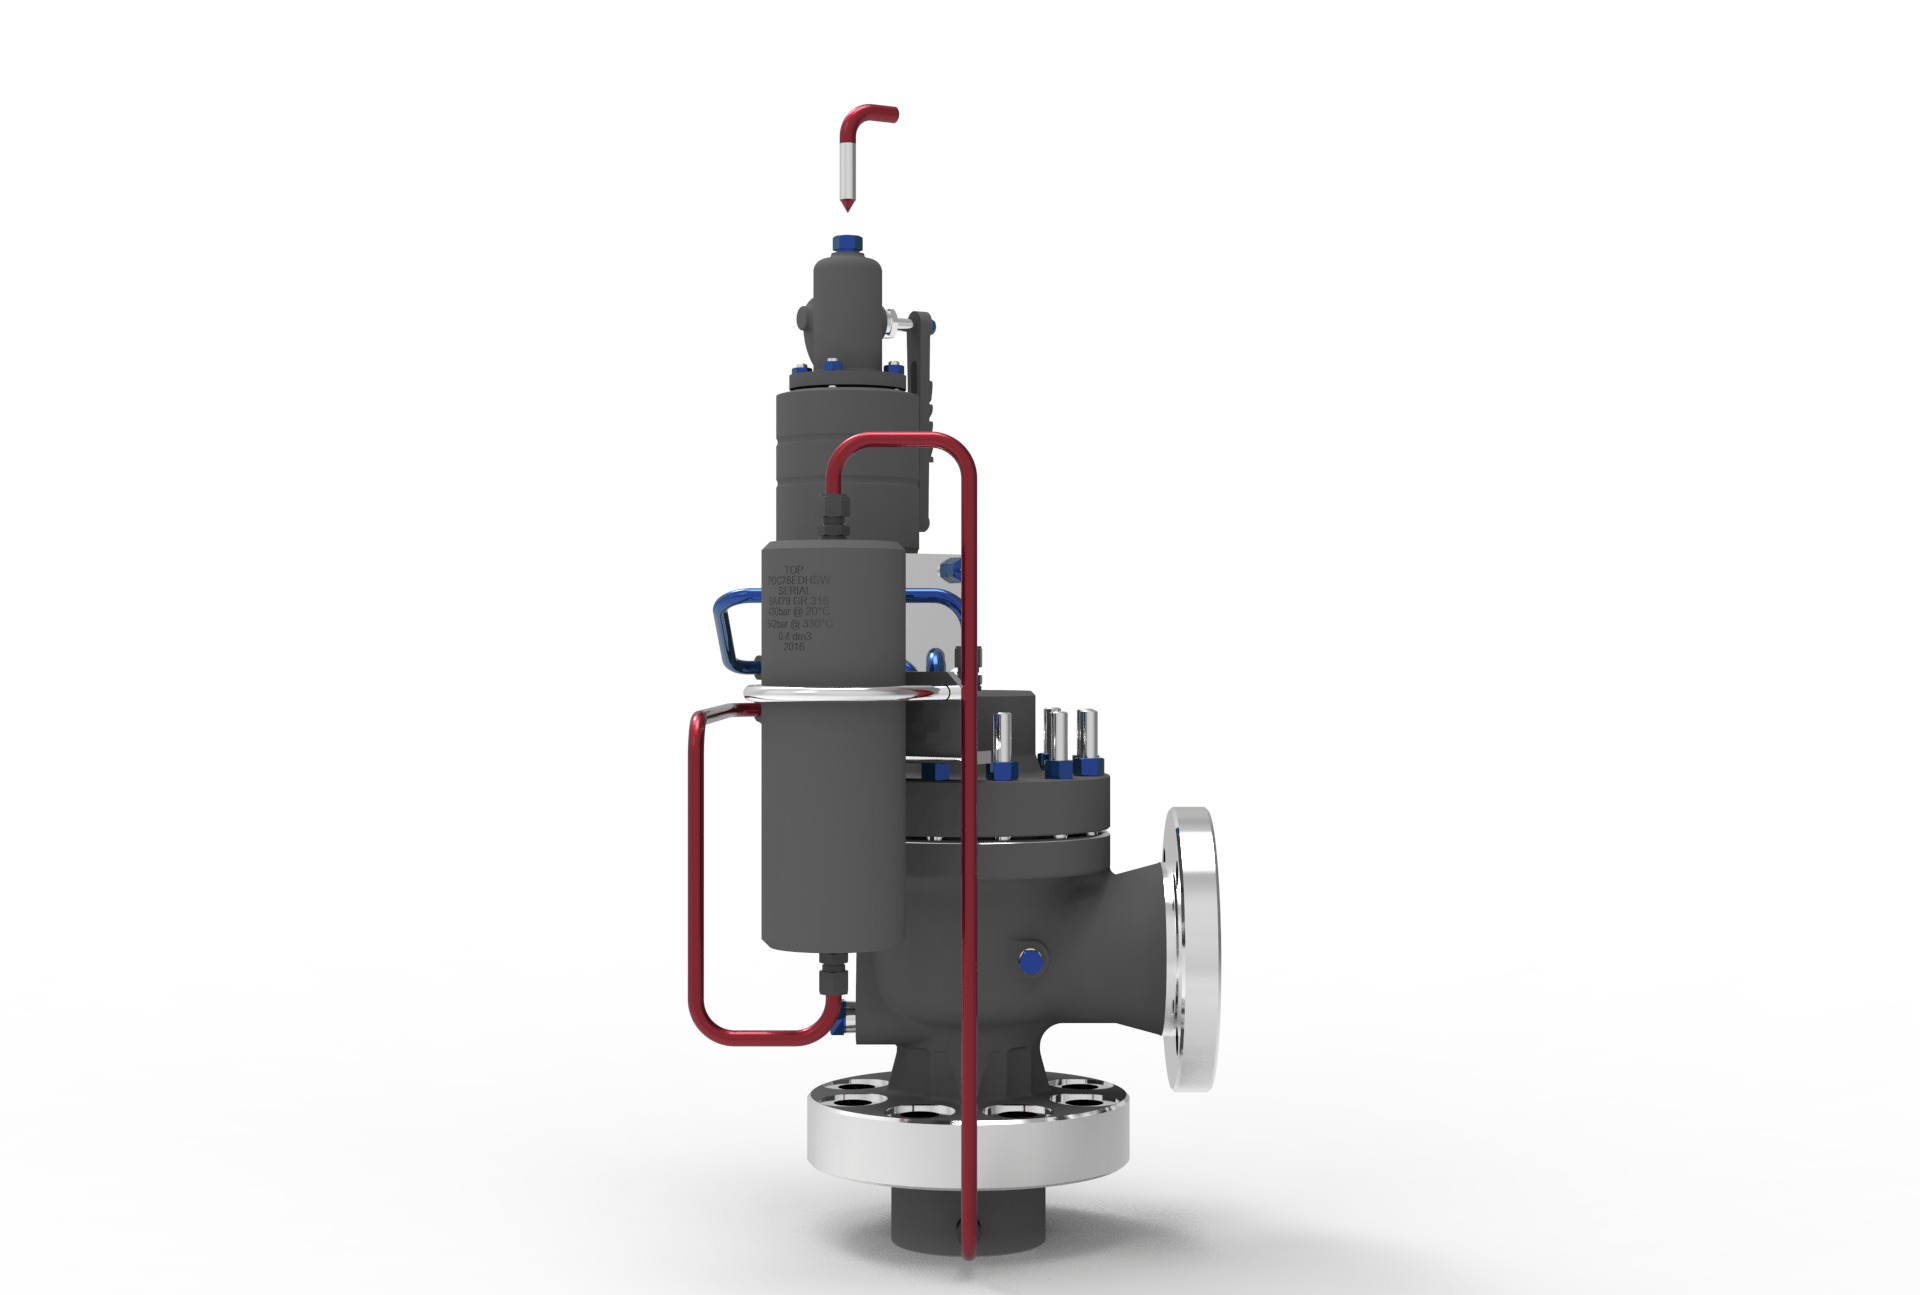 SARASIN-RSBD® STARECO (76E SERIES) PILOT OPERATED PRESSURE RELIEF VALVE right side view